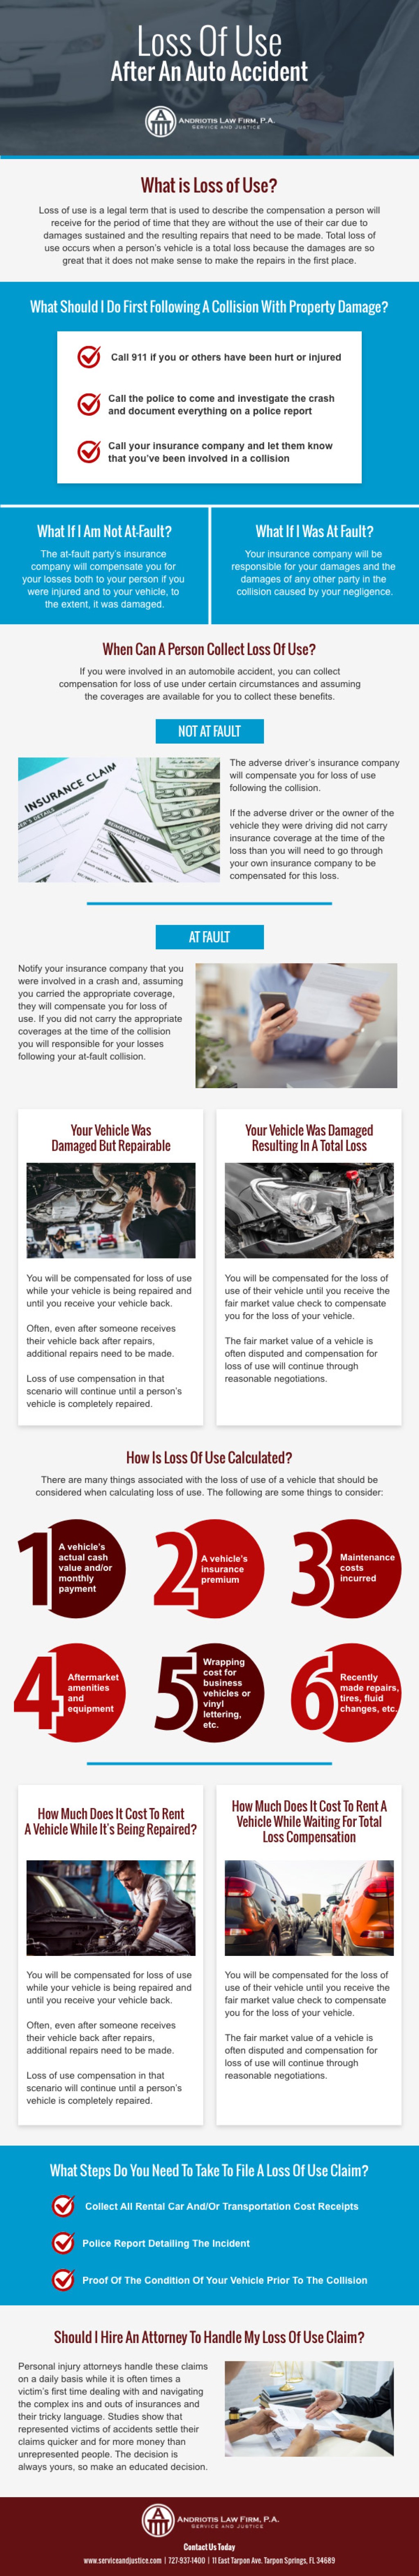 Picture of: Understanding Loss of Use After An Auto Accident – Andriotis Law Firm